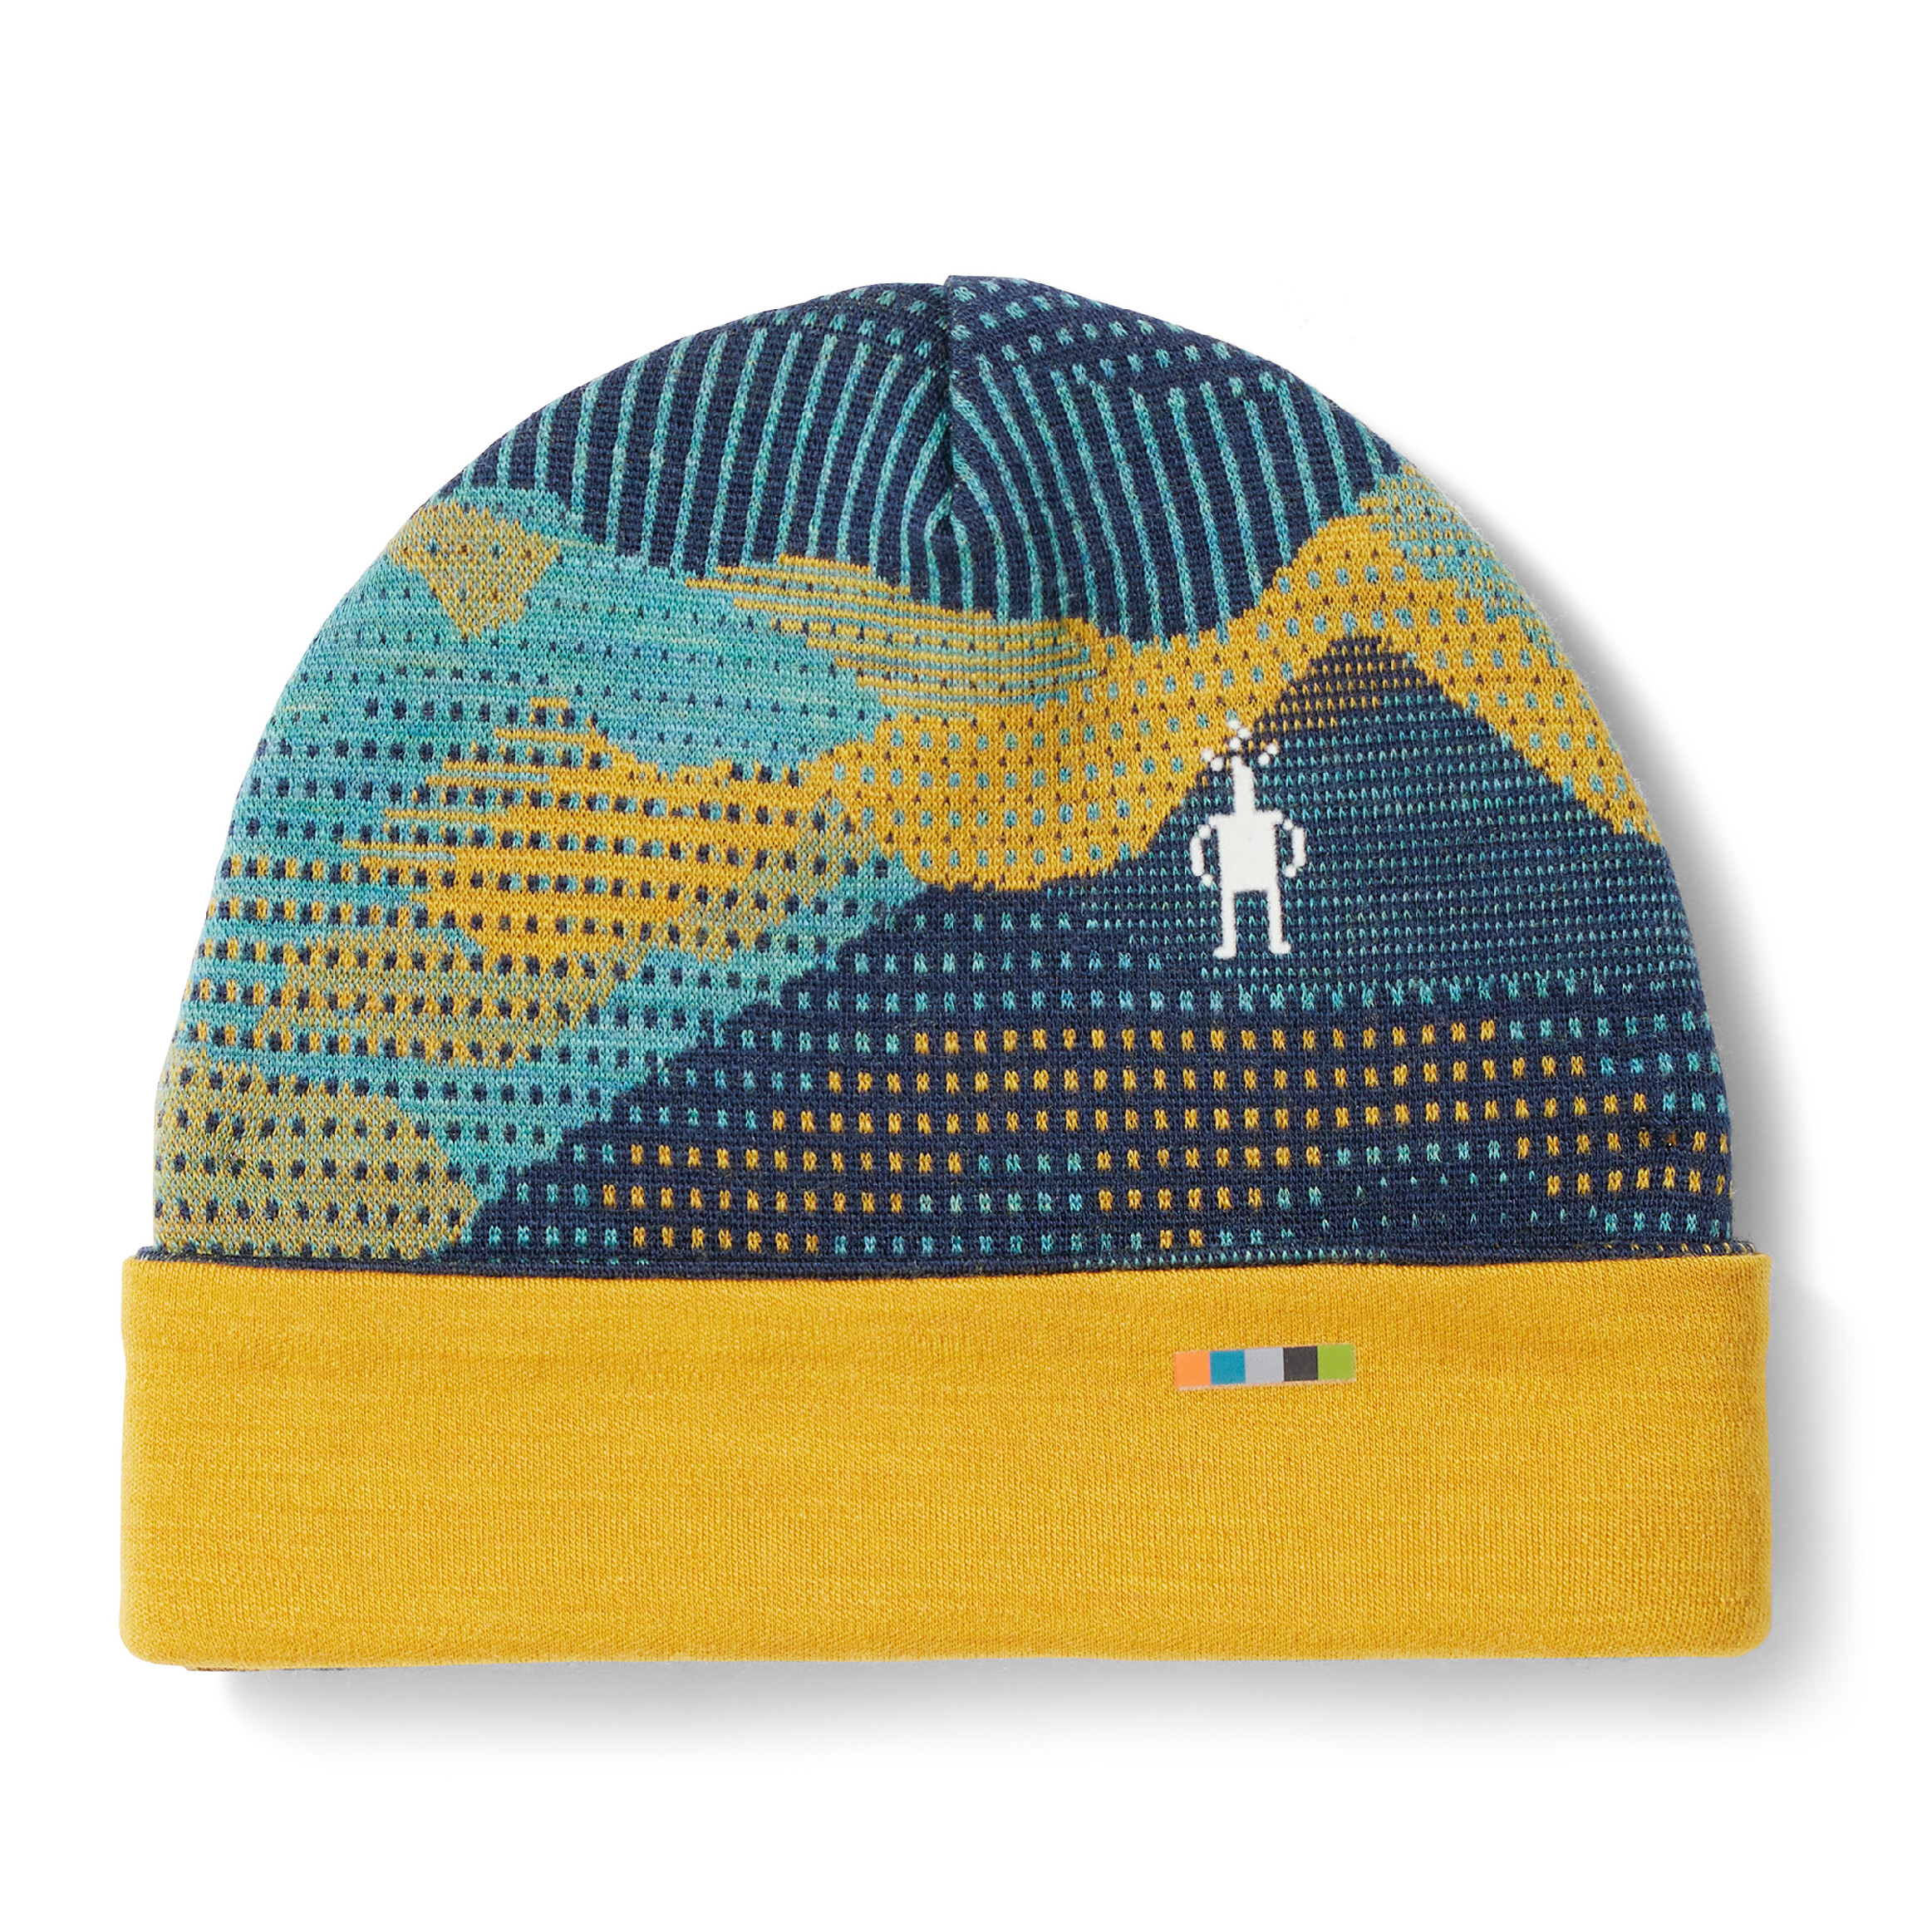 E-shop Smartwool K THERMAL MERINO REVERSIBLE CUFFED BEANIE blueberry mtn scape